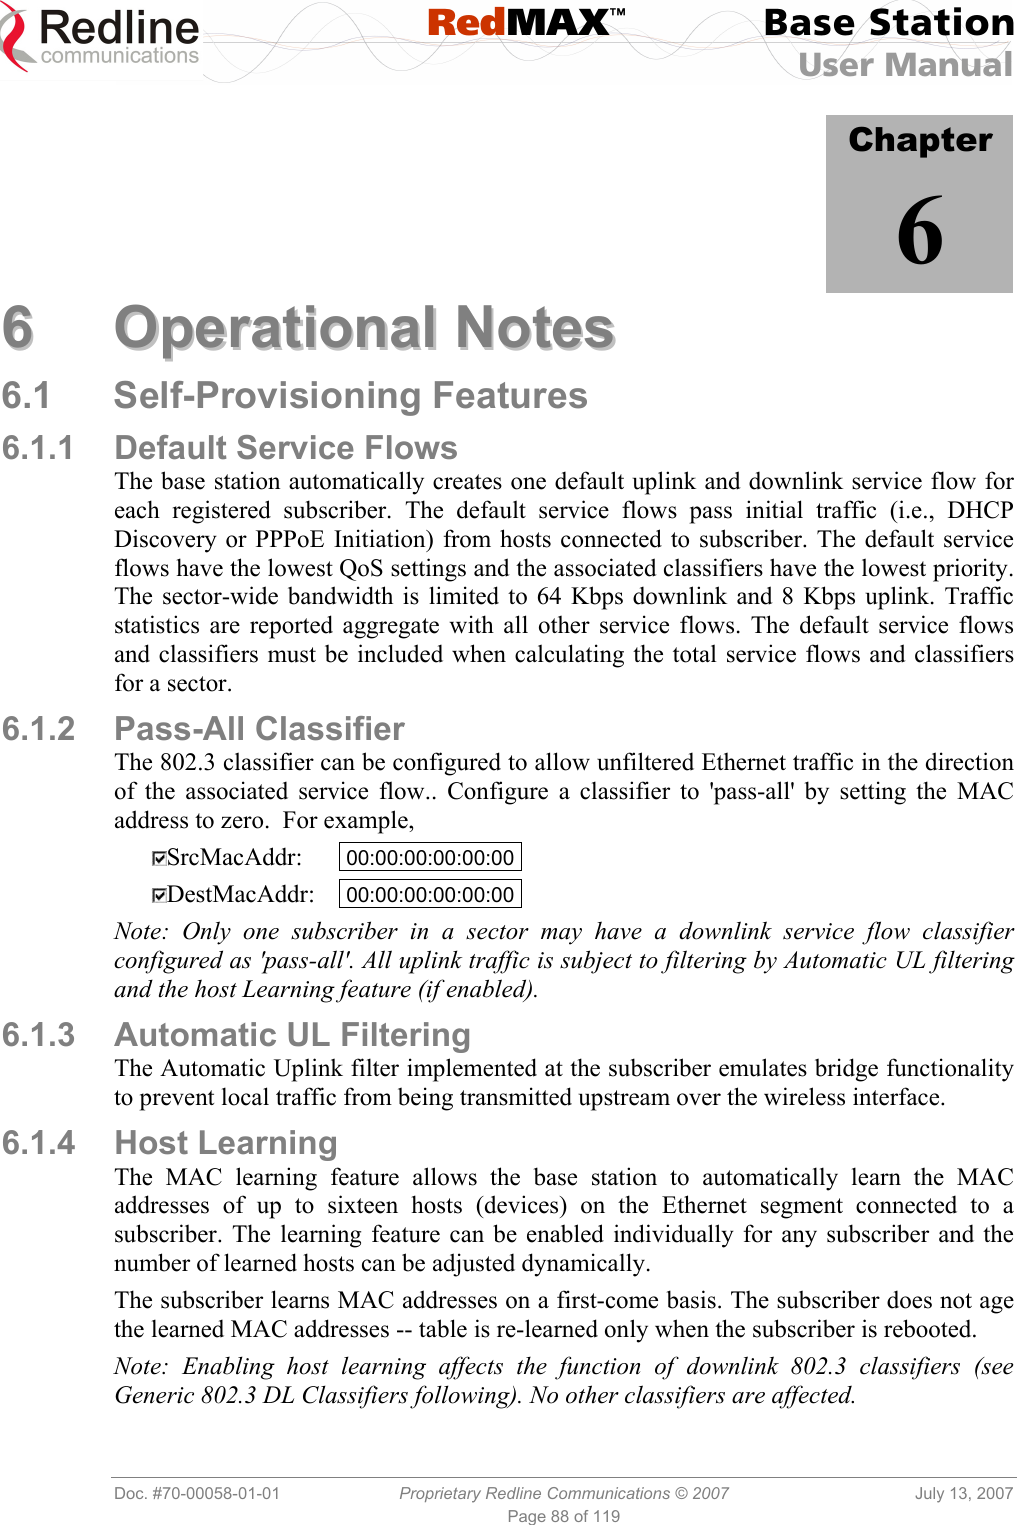  RedMAX™ Base Station User Manual   Doc. #70-00058-01-01  Proprietary Redline Communications © 2007  July 13, 2007 Page 88 of 119            Chapter 6 66  OOppeerraattiioonnaall  NNootteess  6.1 Self-Provisioning Features 6.1.1 Default Service Flows The base station automatically creates one default uplink and downlink service flow for each registered subscriber. The default service flows pass initial traffic (i.e., DHCP Discovery or PPPoE Initiation) from hosts connected to subscriber. The default service flows have the lowest QoS settings and the associated classifiers have the lowest priority. The sector-wide bandwidth is limited to 64 Kbps downlink and 8 Kbps uplink. Traffic statistics are reported aggregate with all other service flows. The default service flows and classifiers must be included when calculating the total service flows and classifiers for a sector. 6.1.2 Pass-All Classifier The 802.3 classifier can be configured to allow unfiltered Ethernet traffic in the direction of the associated service flow.. Configure a classifier to &apos;pass-all&apos; by setting the MAC address to zero.  For example,   SrcMacAddr:   00:00:00:00:00:00 .  DestMacAddr:   00:00:00:00:00:00 . Note: Only one subscriber in a sector may have a downlink service flow classifier configured as &apos;pass-all&apos;. All uplink traffic is subject to filtering by Automatic UL filtering and the host Learning feature (if enabled).  6.1.3  Automatic UL Filtering The Automatic Uplink filter implemented at the subscriber emulates bridge functionality to prevent local traffic from being transmitted upstream over the wireless interface. 6.1.4 Host Learning The MAC learning feature allows the base station to automatically learn the MAC addresses of up to sixteen hosts (devices) on the Ethernet segment connected to a subscriber. The learning feature can be enabled individually for any subscriber and the number of learned hosts can be adjusted dynamically.  The subscriber learns MAC addresses on a first-come basis. The subscriber does not age the learned MAC addresses -- table is re-learned only when the subscriber is rebooted.  Note: Enabling host learning affects the function of downlink 802.3 classifiers (see Generic 802.3 DL Classifiers following). No other classifiers are affected. 